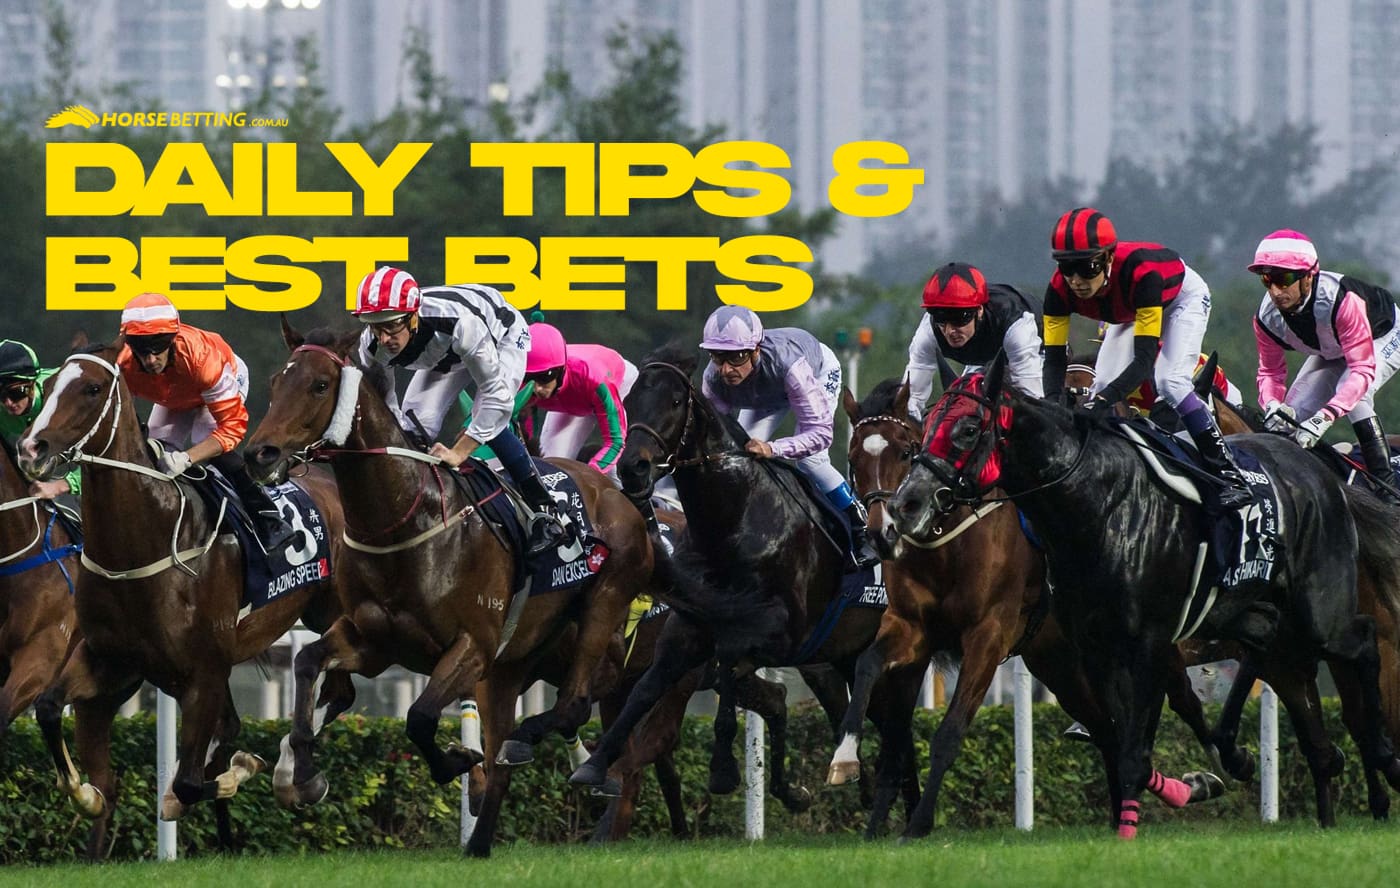 Wednesday free horse racing tips & best bets